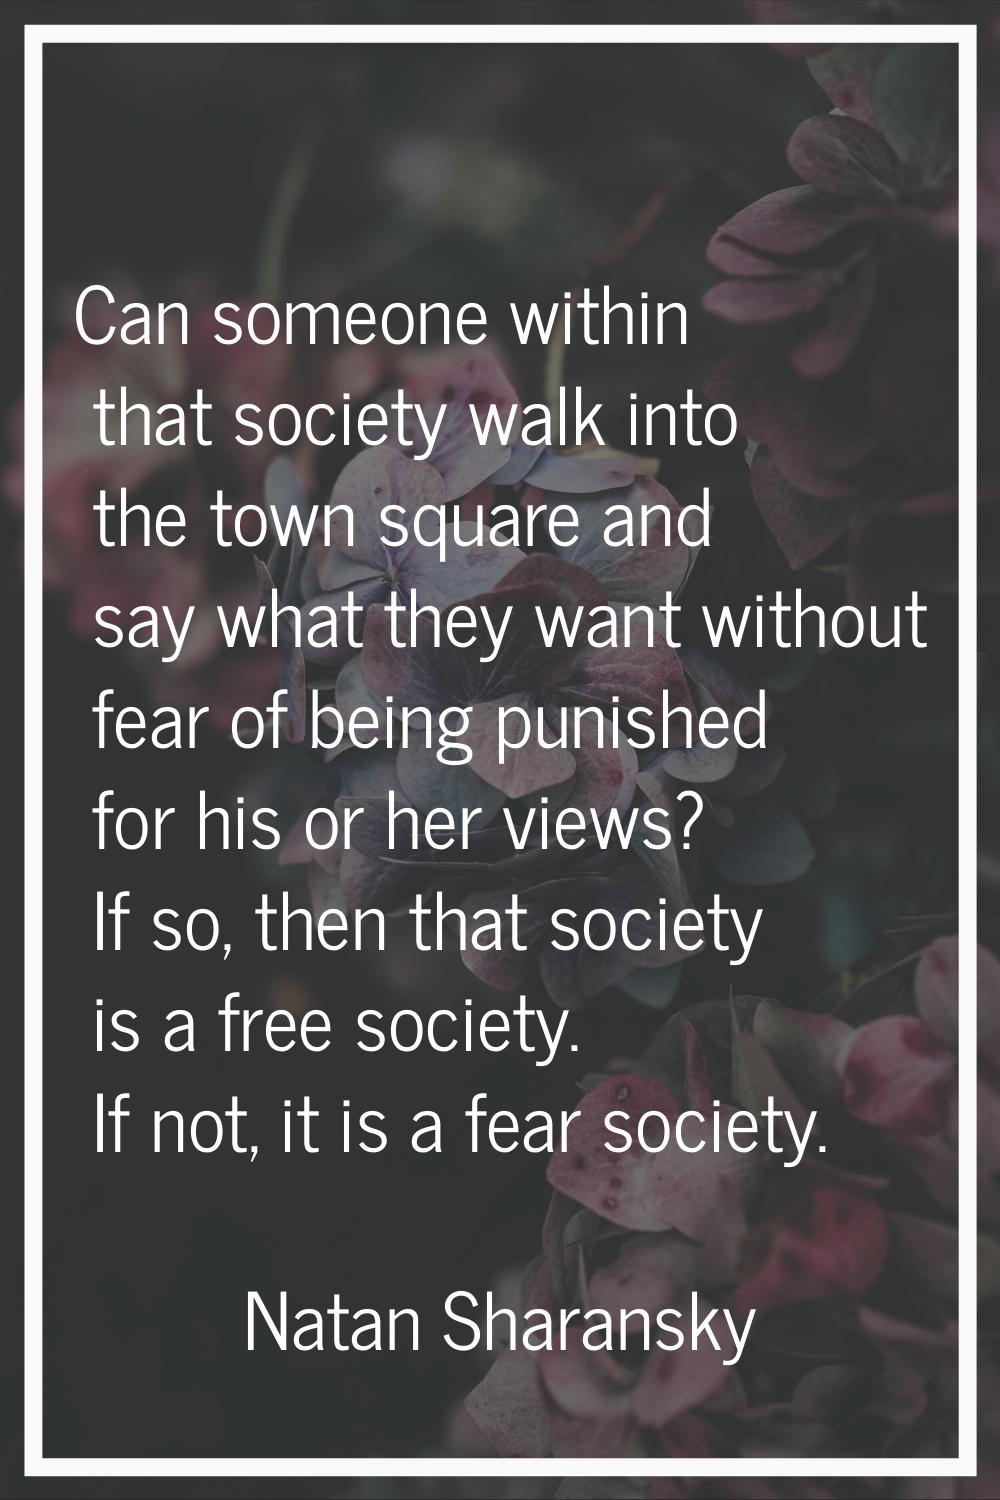 Can someone within that society walk into the town square and say what they want without fear of be